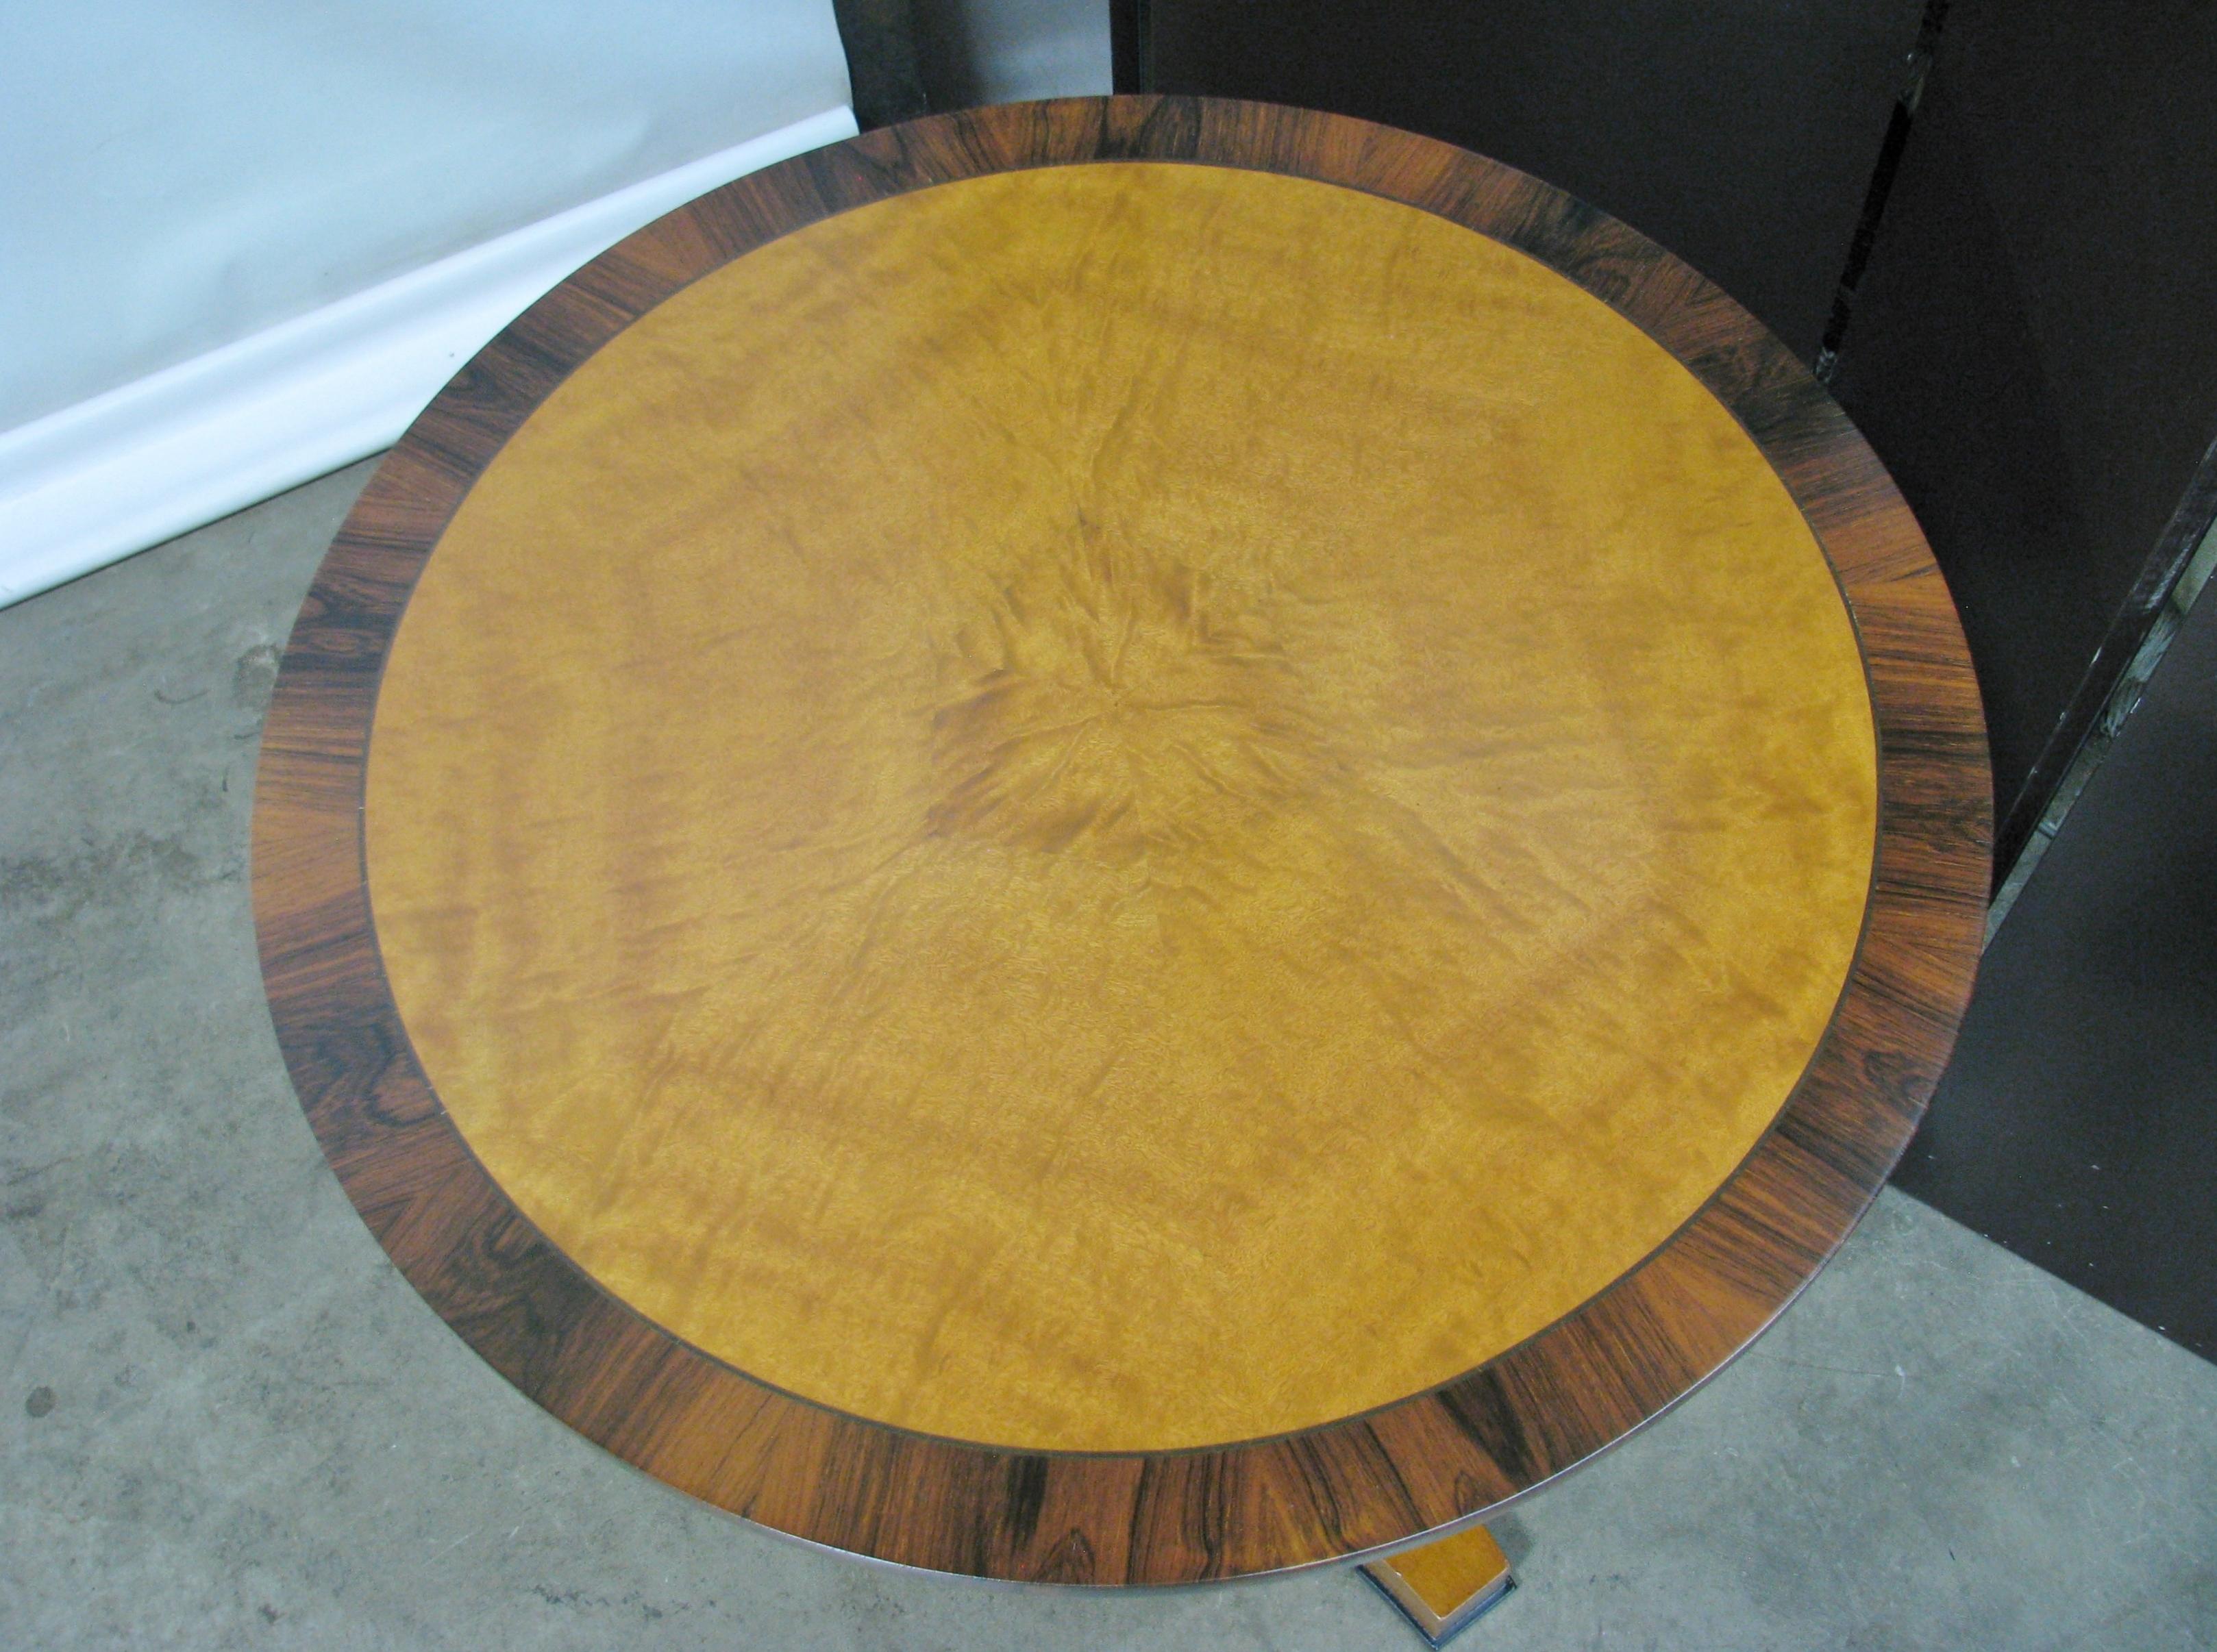 Beautiful, 'heavy', custom made Empire/Biedermeier style round lamp or center table. Executed for the high-end Miami design firm Richard Plumer. It features cherry solids and veneers, with a banded edge on the top of rosewood. Brass ornaments and